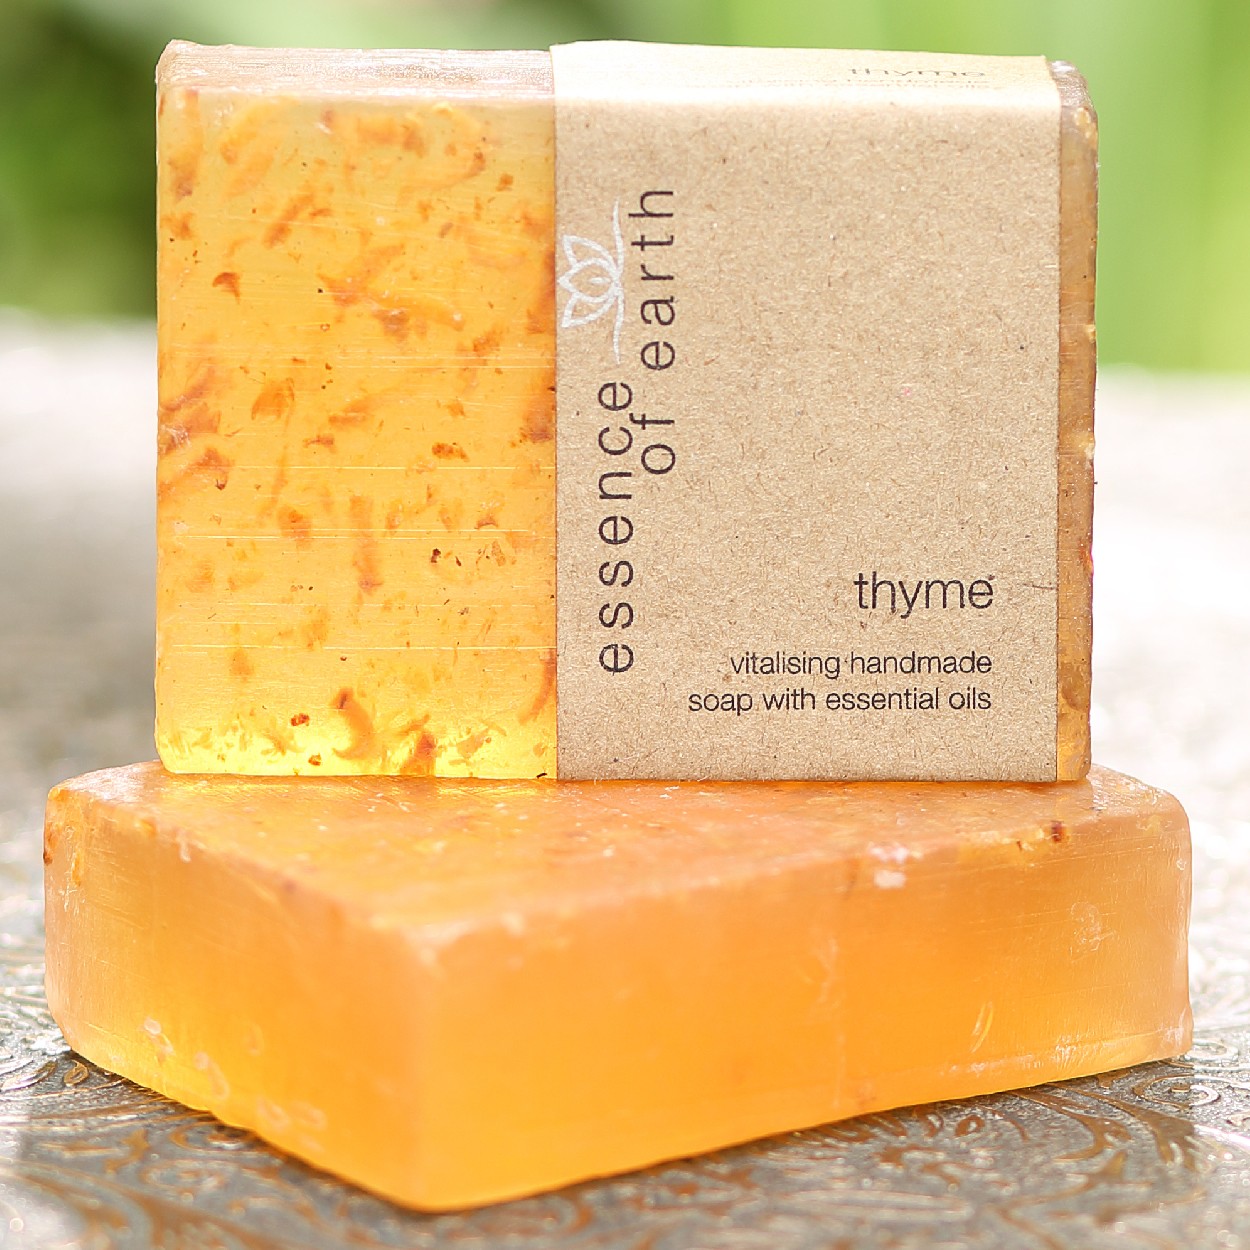 Thyme Vitalising Handmade Soap With Essential Oils Essence of Earth